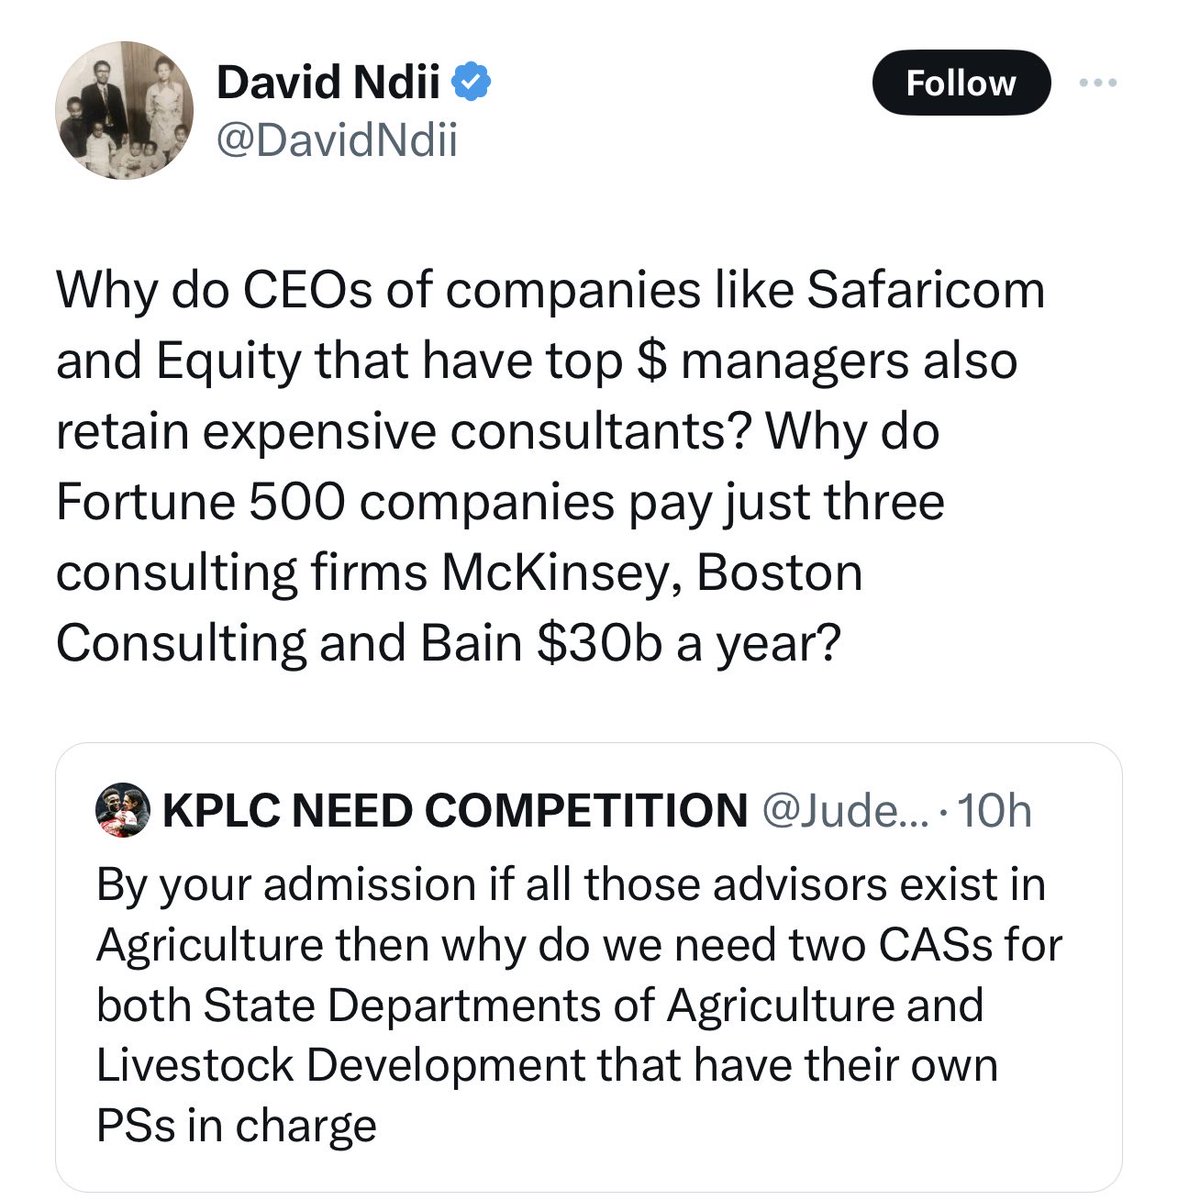 David Ndii has lost direction and morals, if he had any. The government of Kenya is not a private entity. Presidential advisors occupy public office and their remuneration cannot be compared to those of consultants of Fortune 500 companies. Such sense of entitlement is disgusting